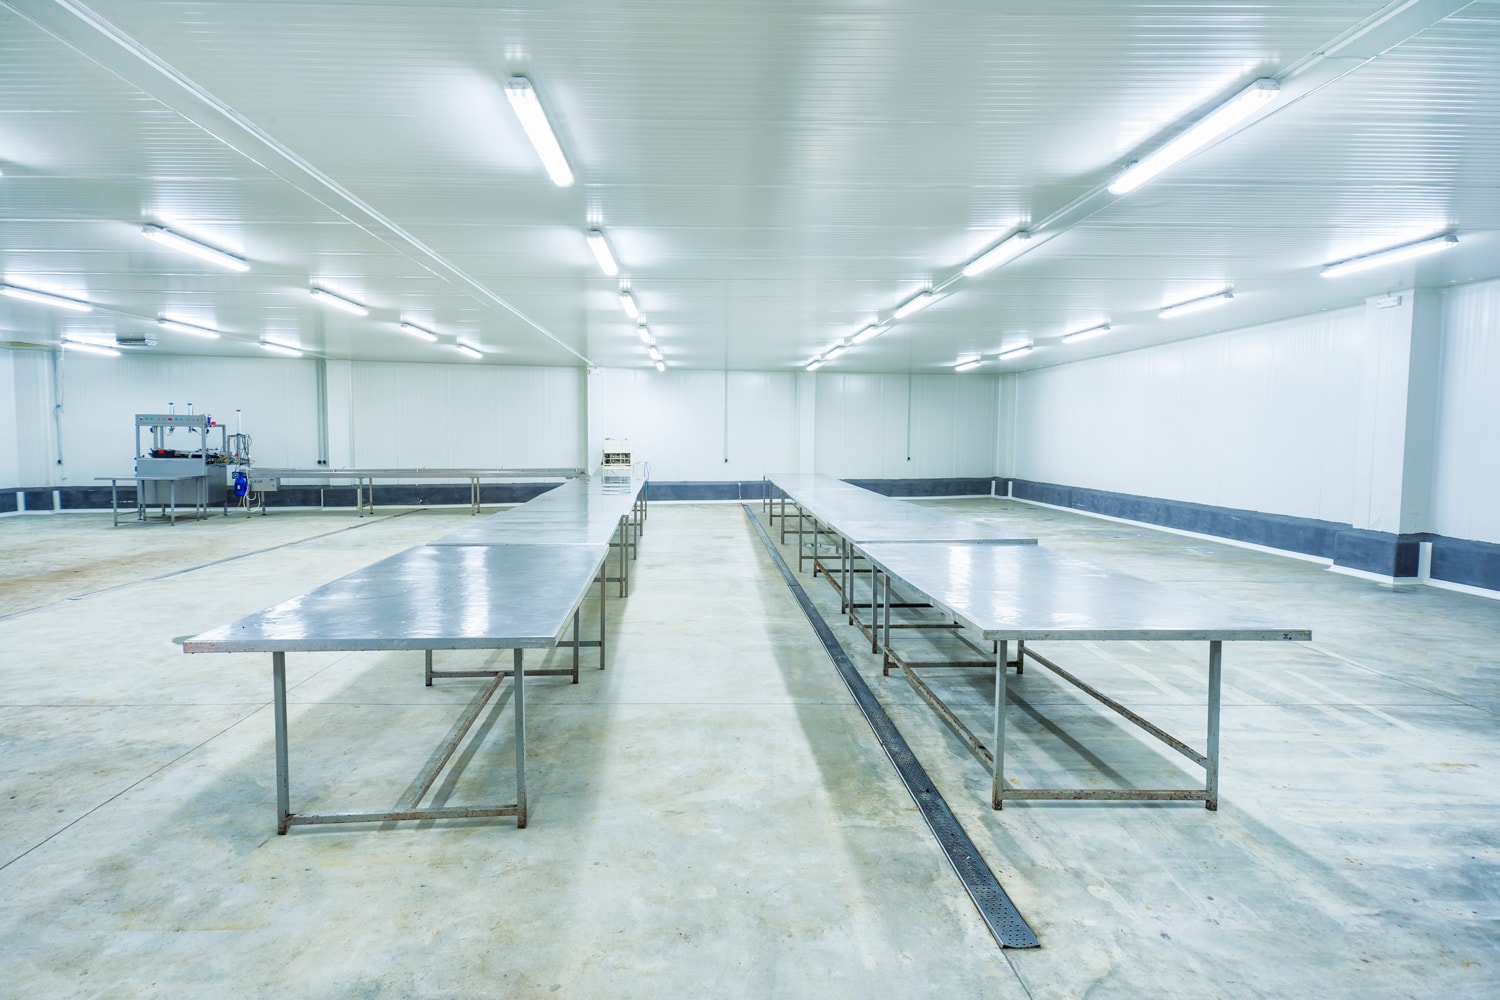 Empty storage in a meat processing factory. Big Industrial refrigerator or dryer for any kind of food, meat, fruit or vegetable. From -10 to -80 degrees celcius.